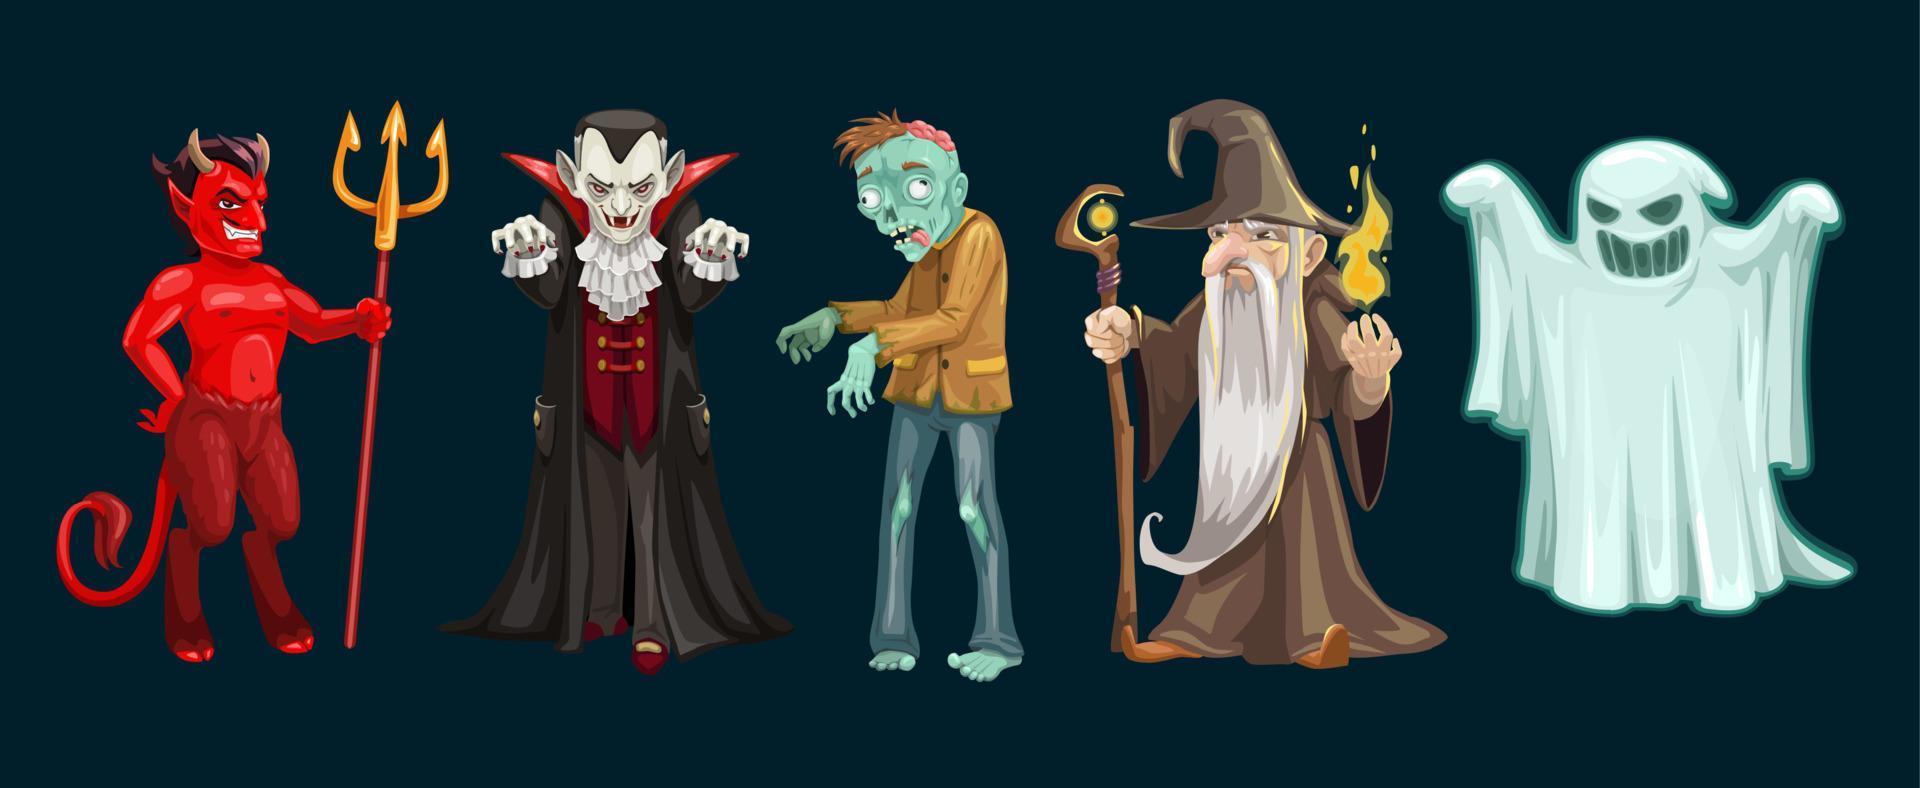 Halloween ghost, vampire and zombie characters vector